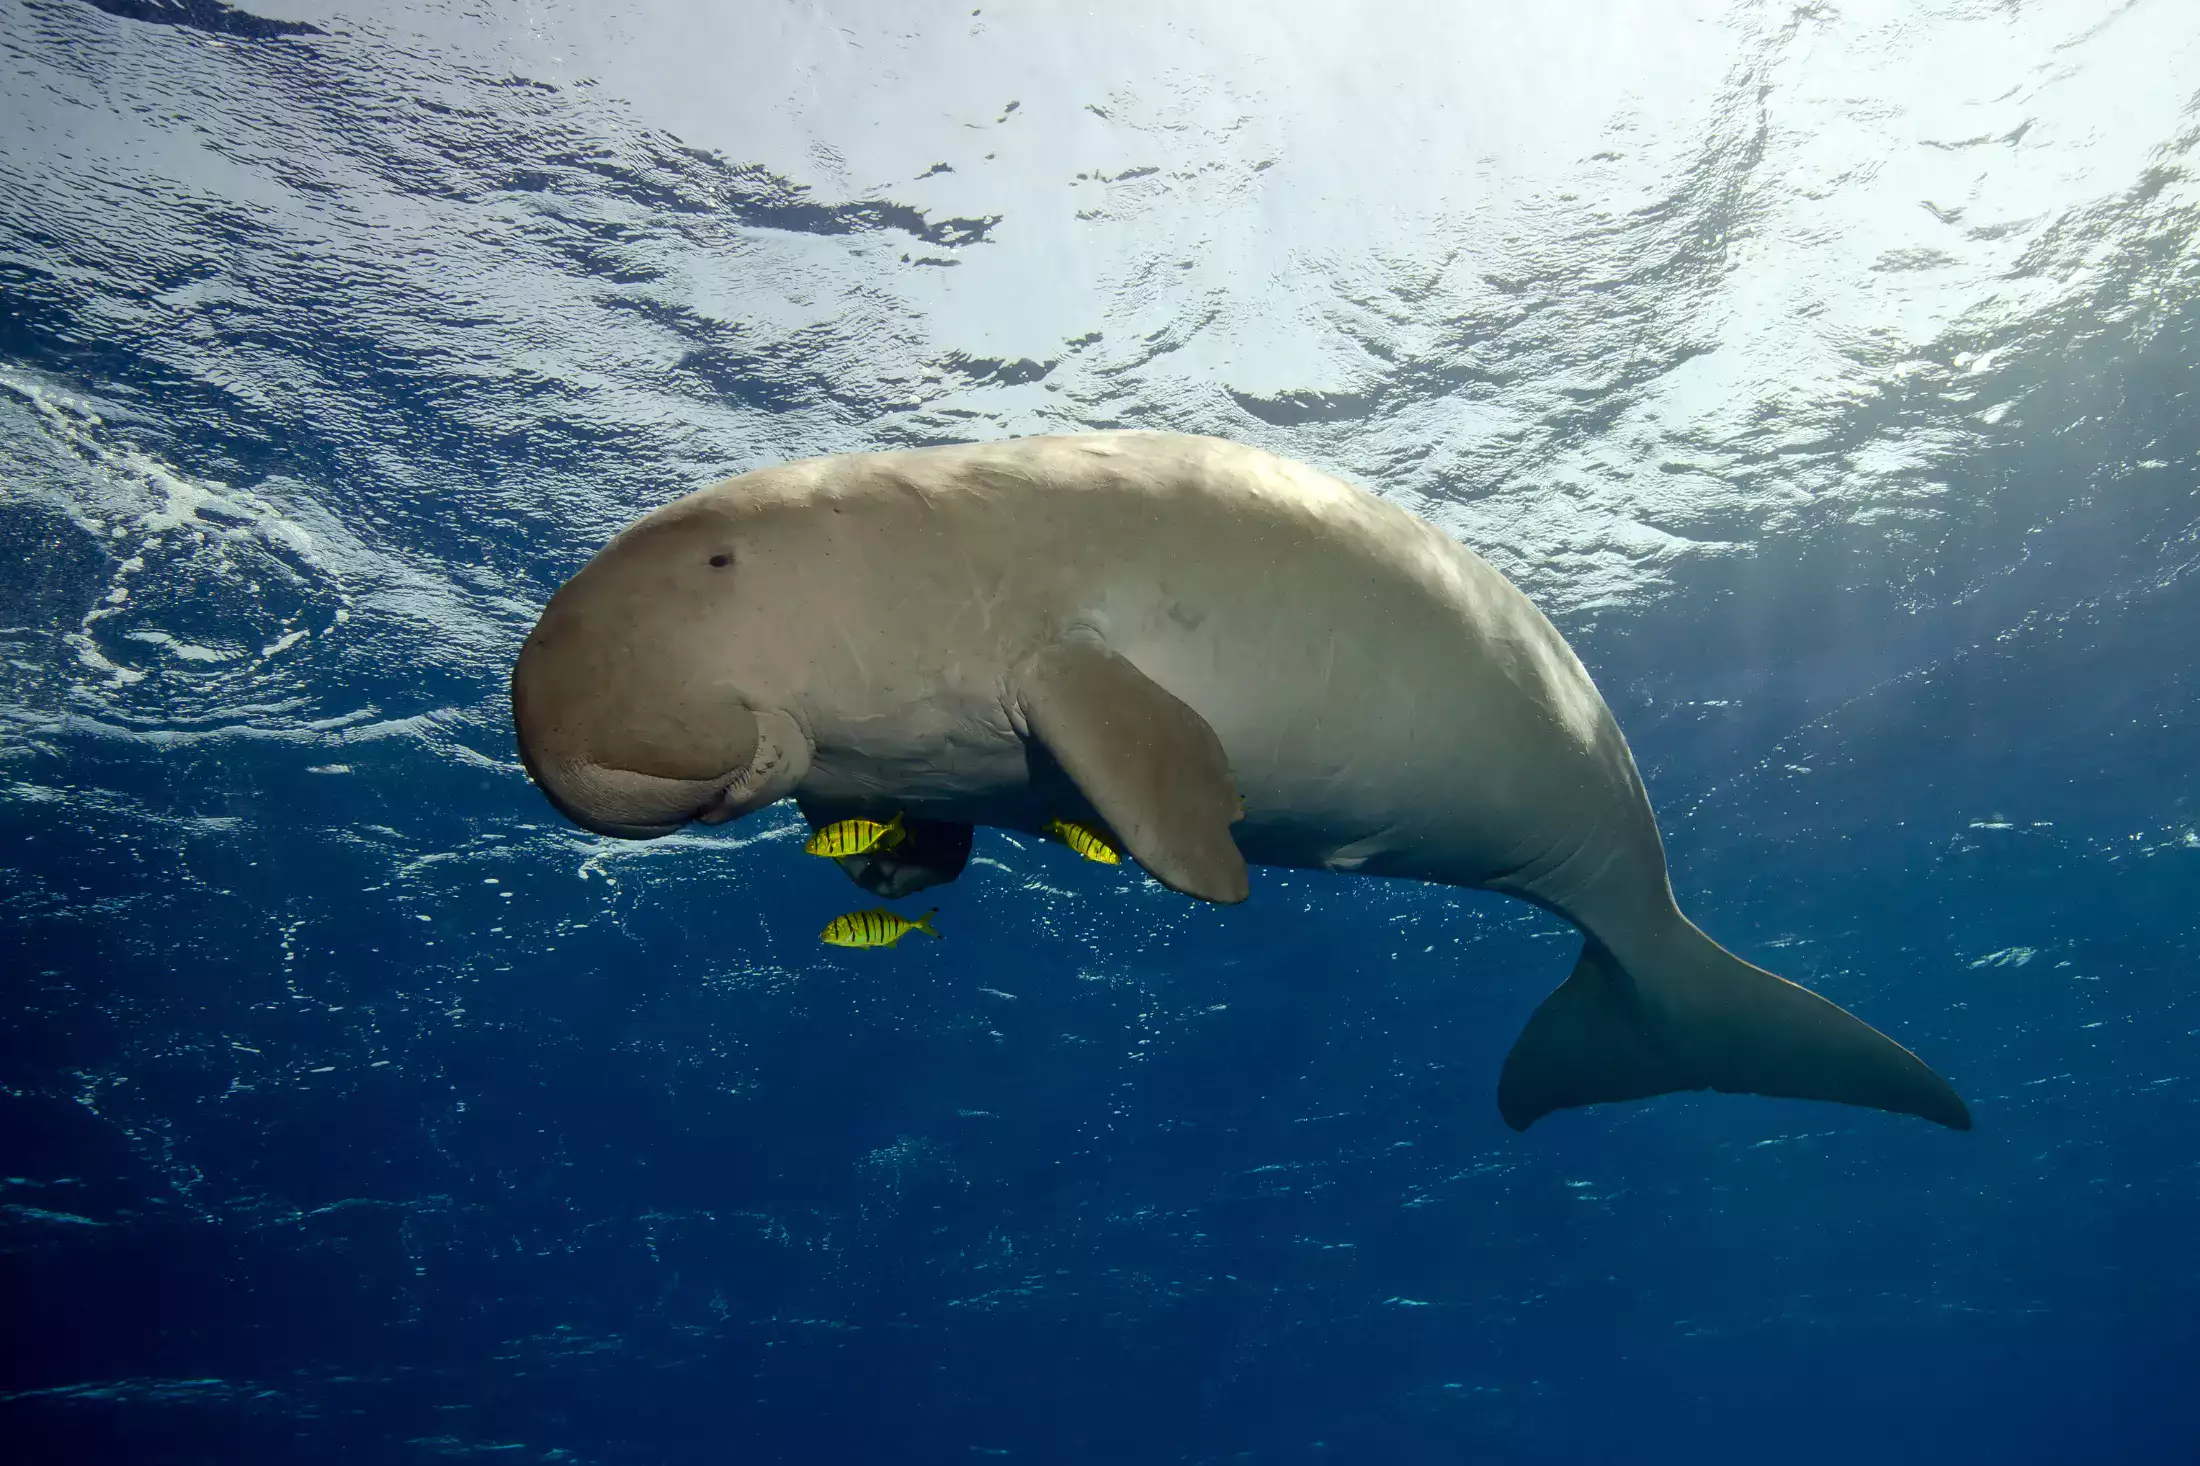 Dugong swimming, a reminder of the sea cows that historically inspired the name 'Île aux Vaches' for Bird Island Seychelles.